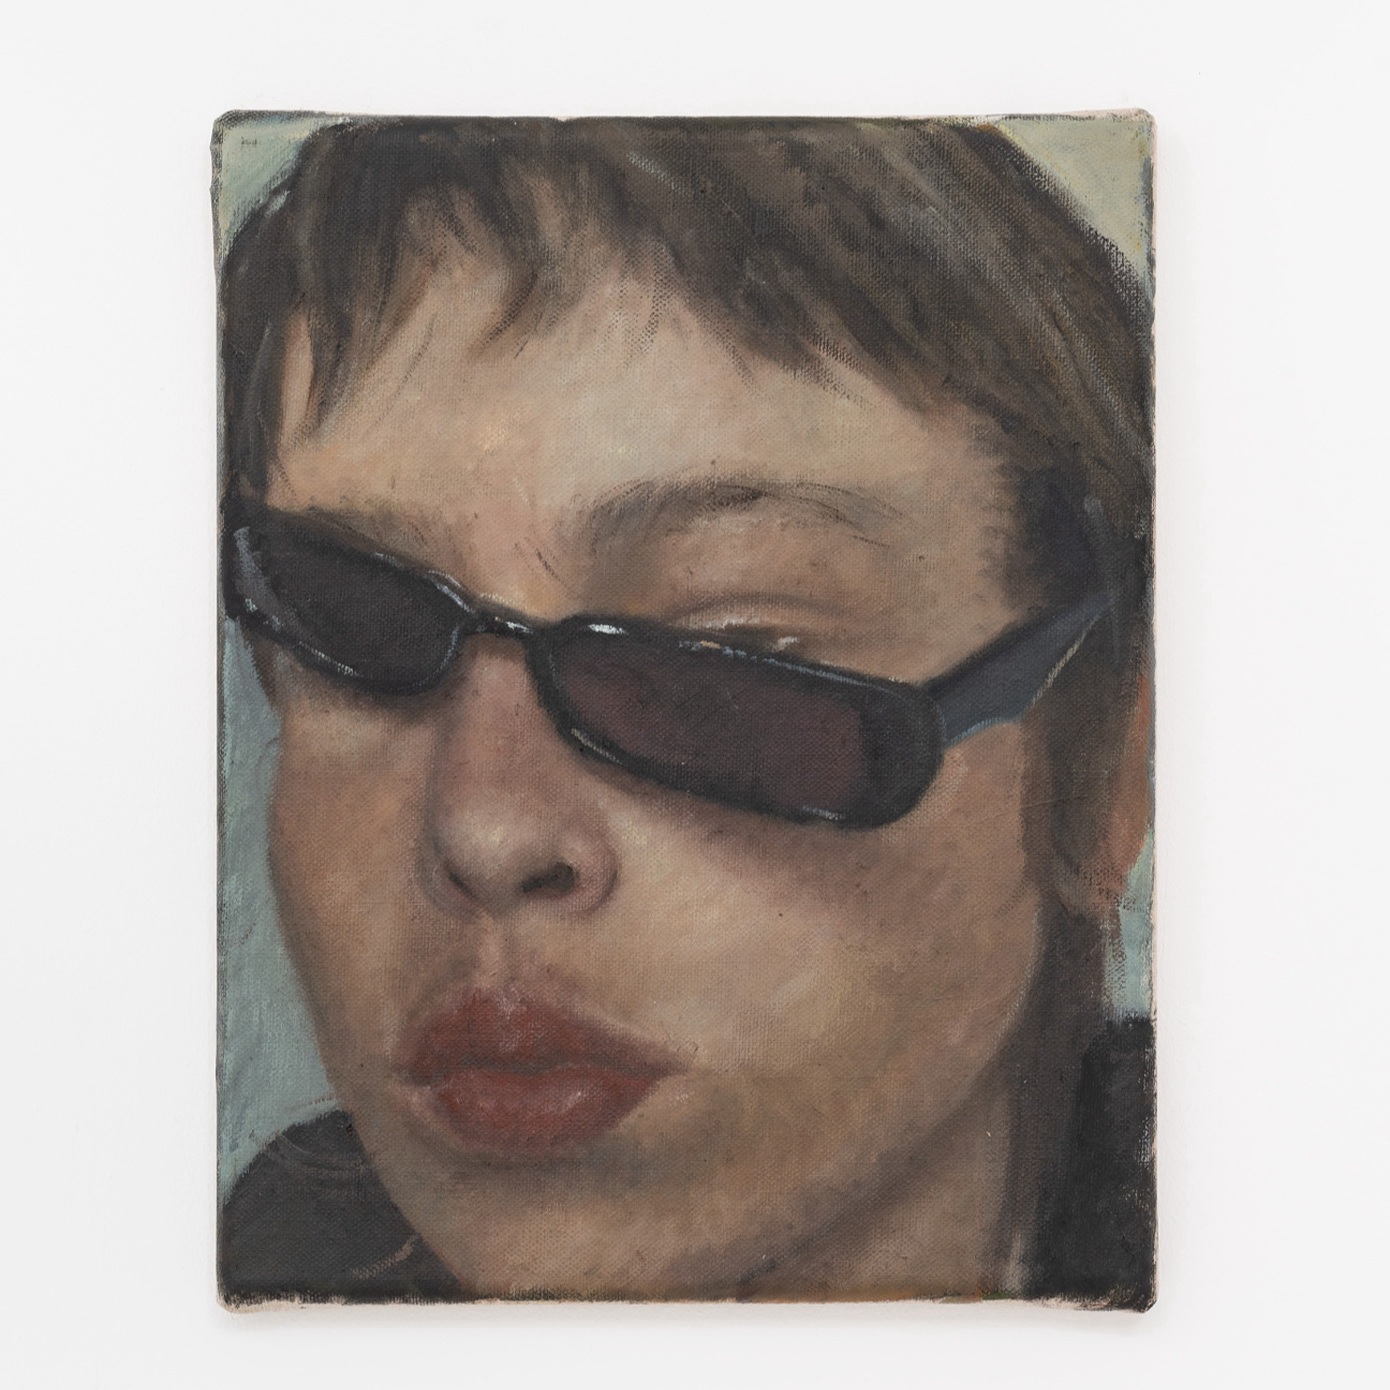 A self-portrait of a woman with sunglasses hanging off face.